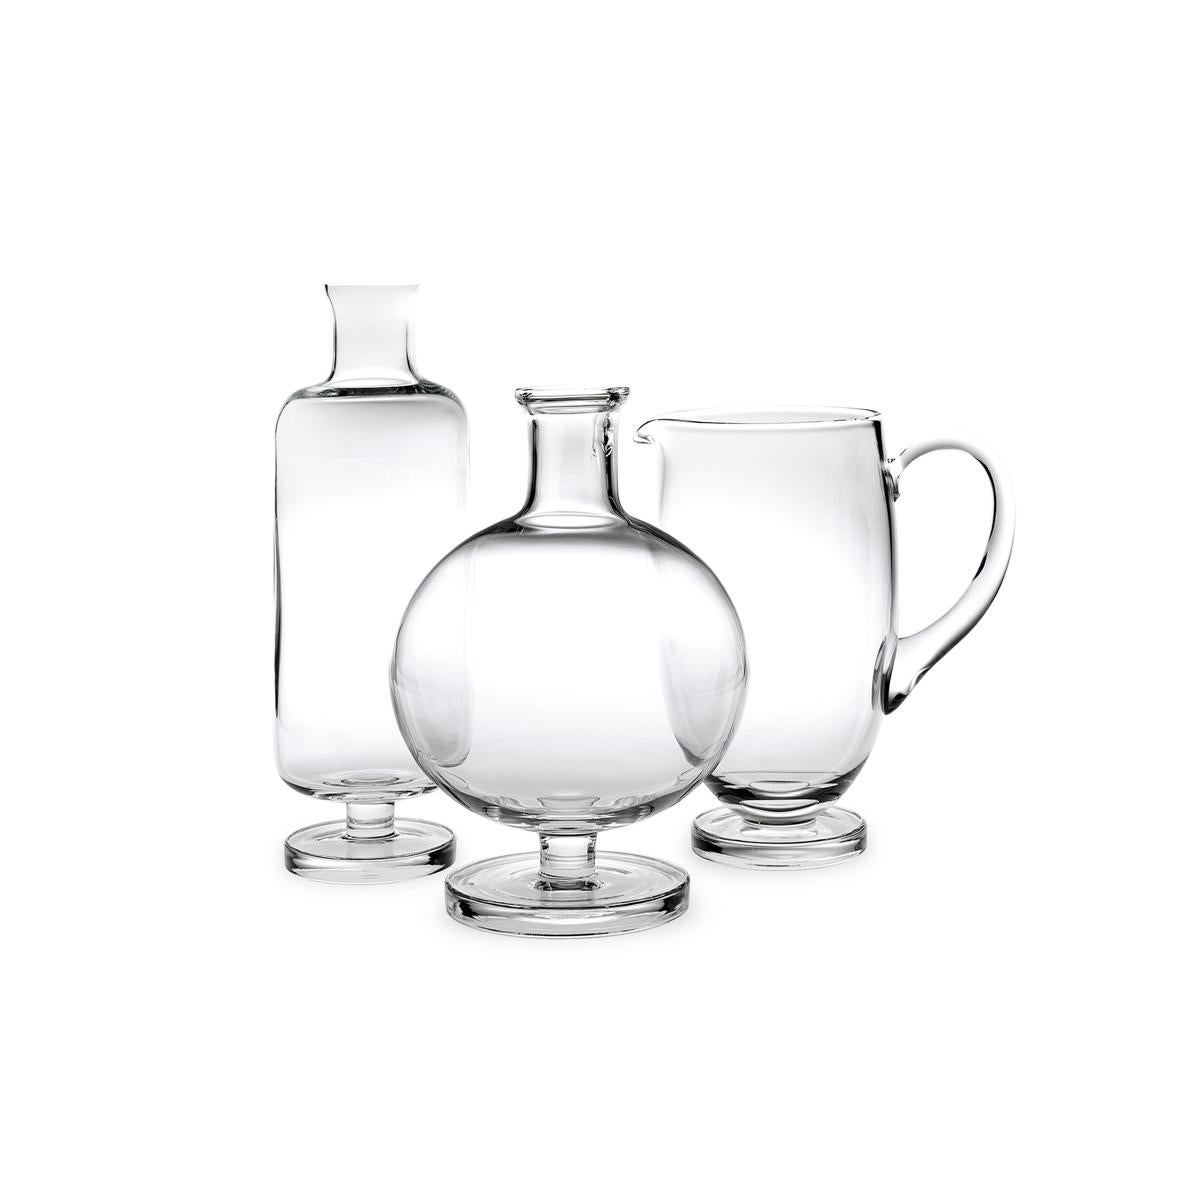 Carafe made in blown in a mold glass. The Tulip collection is a glassware family by Aldo Cibic, who designed these pieces walking the line between classical and postmodern design. The boldly simple geometric forms are at once contemporary and